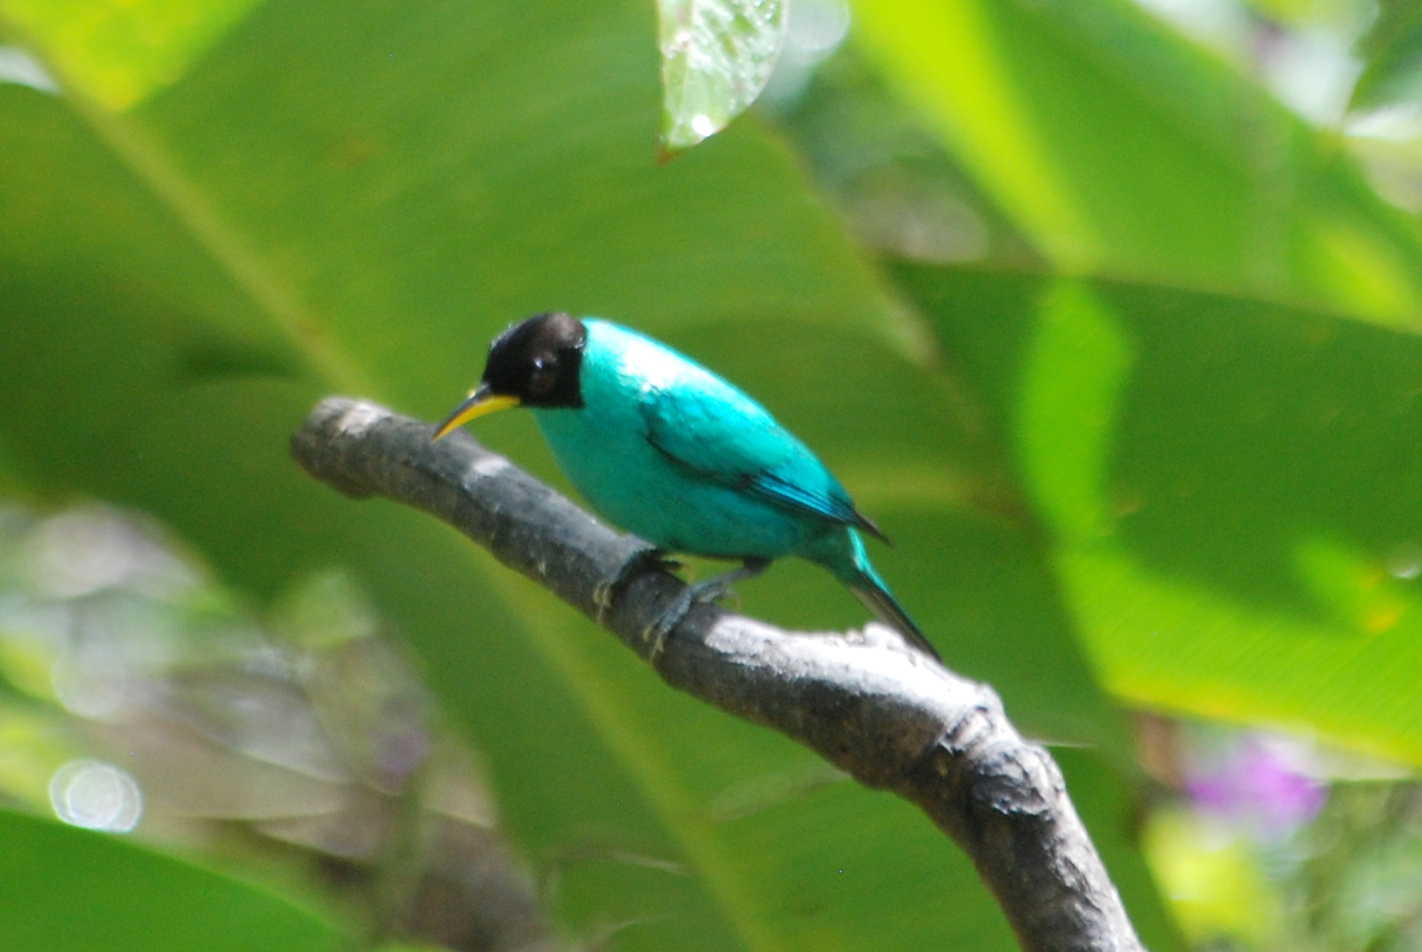 Click picture to see more Green Honeycreepers.